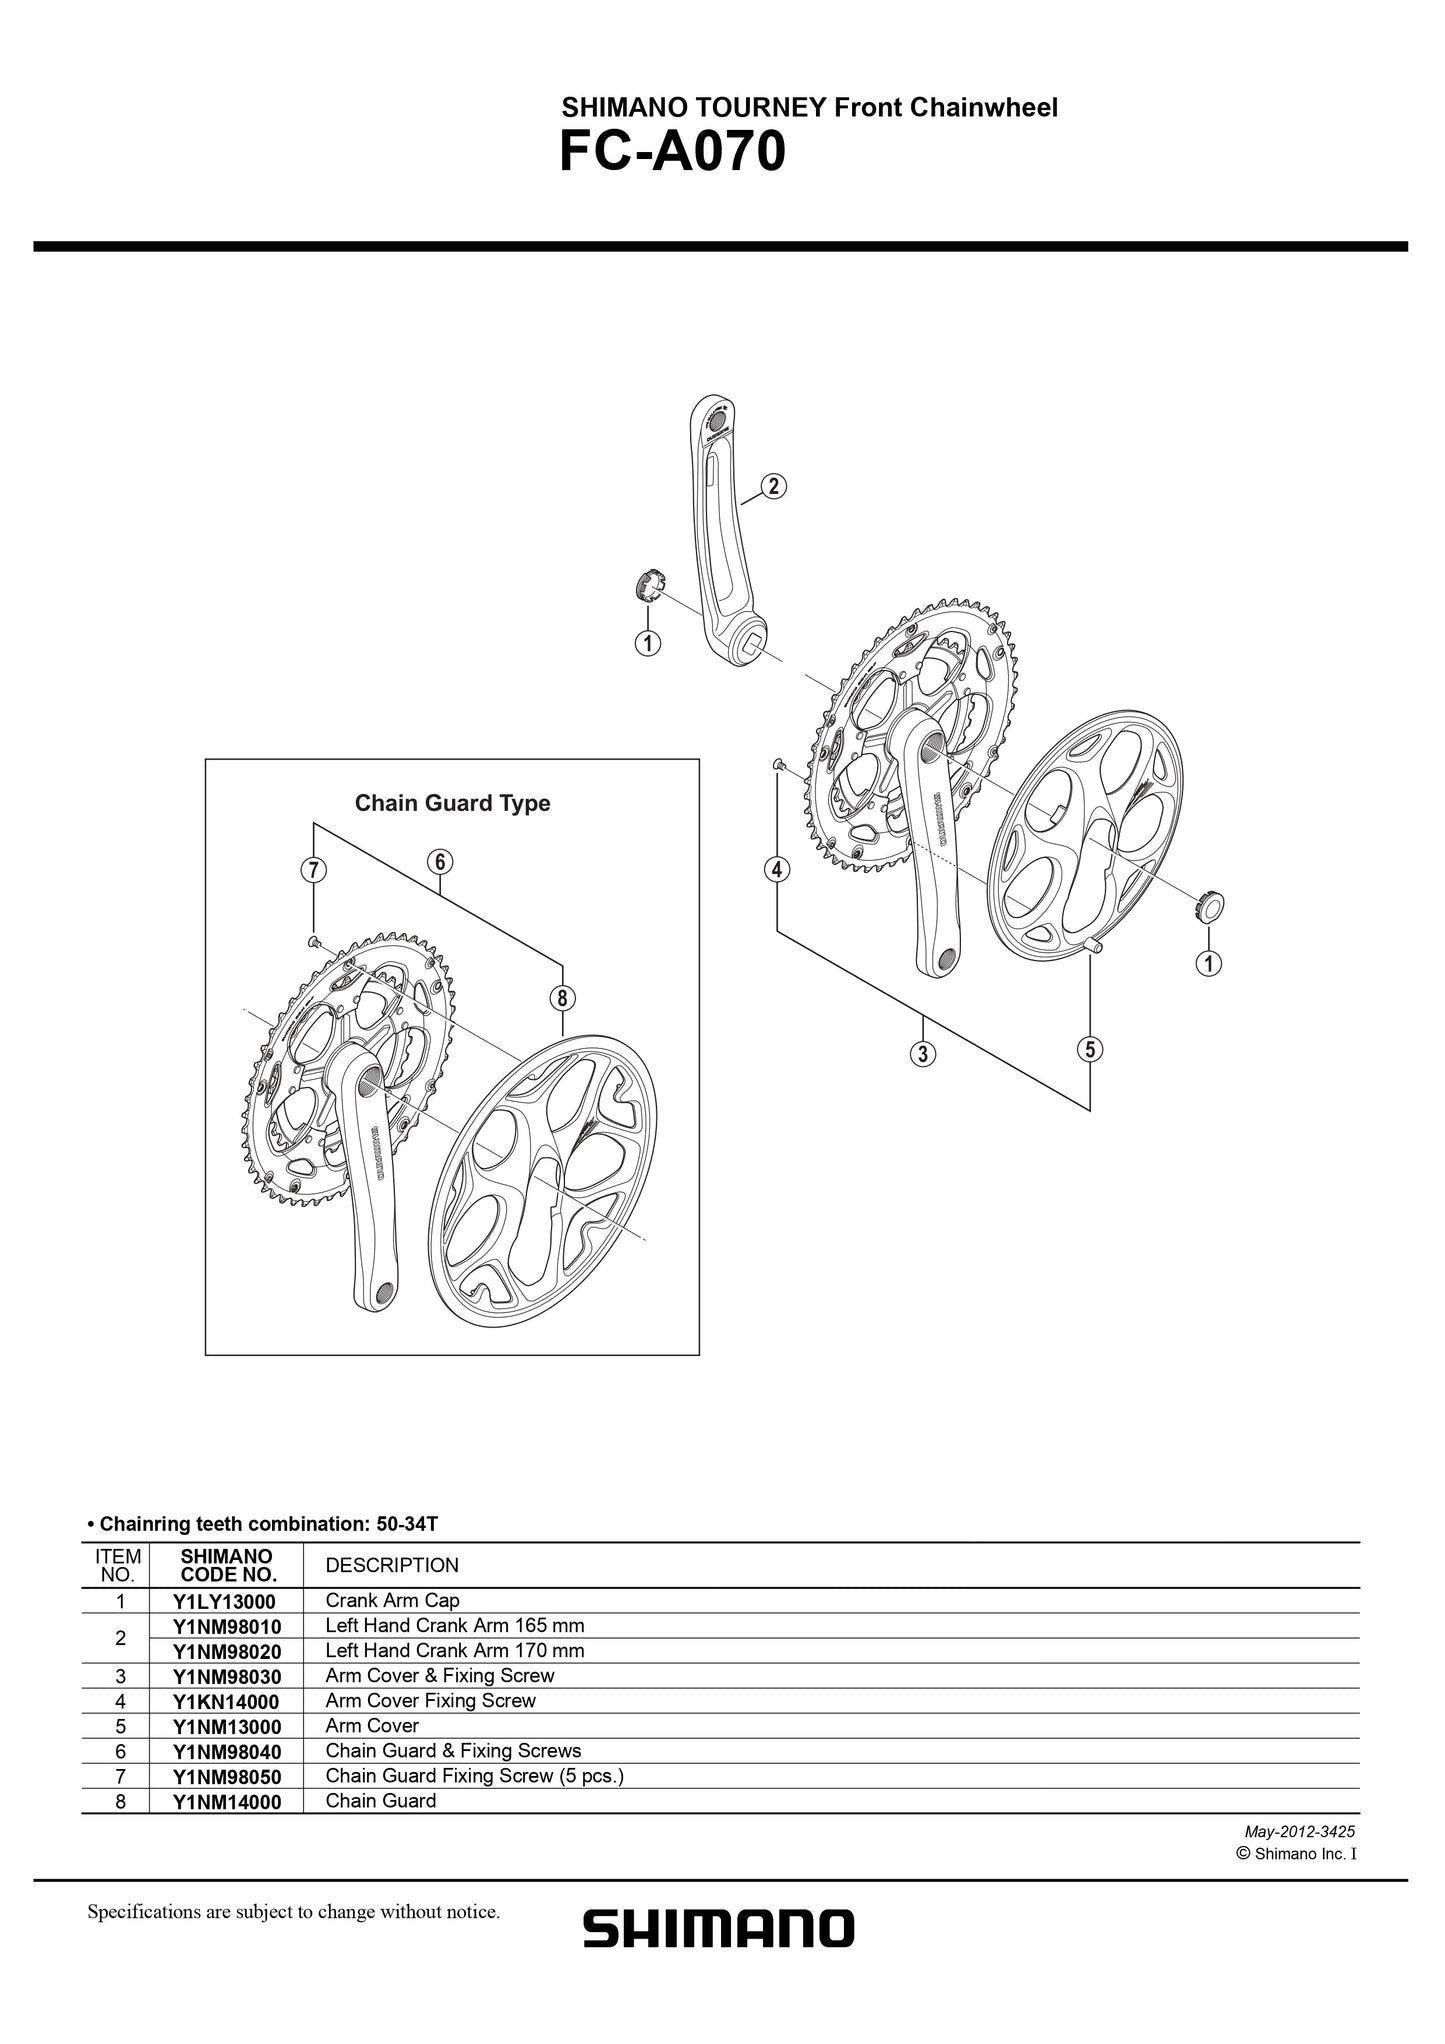 SHIMANO Tourney FC-A070 Front Chainwheel Chain Guard and Fixing Screws - Y1NM98040-Pit Crew Cycles